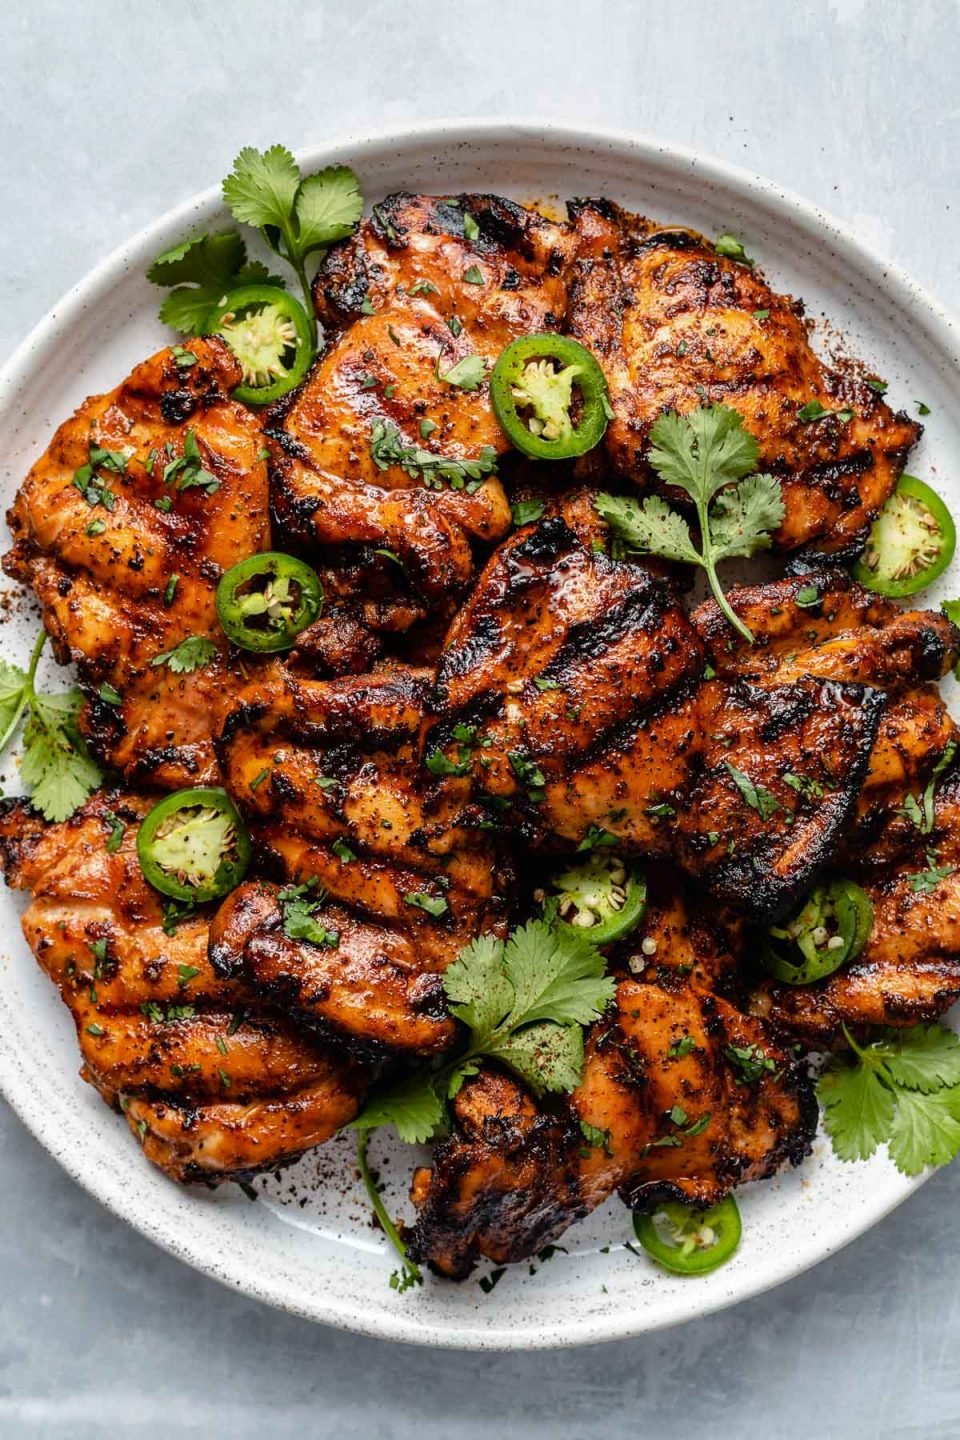 Grilled chili lime chicken thighs shown on a white speckled plate atop a light blue surface. The chicken is garnished with fresh cilantro leaves, sliced jalapeño, & ground black pepper.